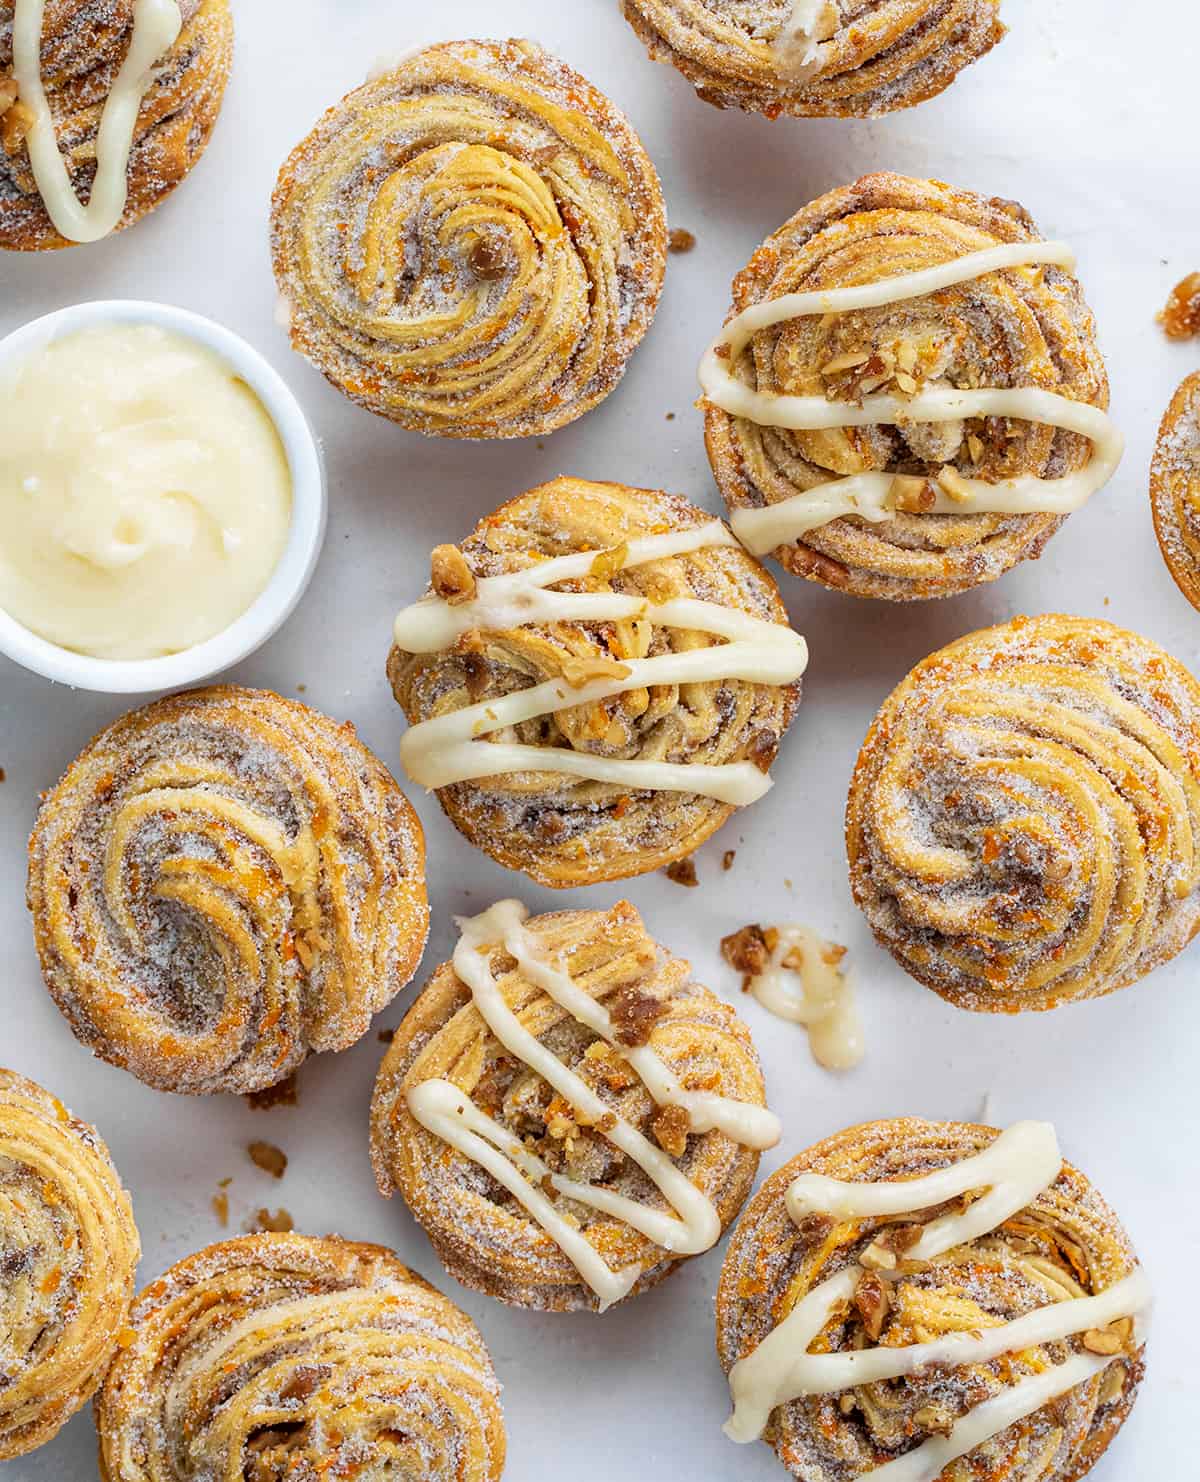 Carrot Cake Cruffins on a White Counter with Some Having Cream Cheese Drizzled Over Top and Some Plain.